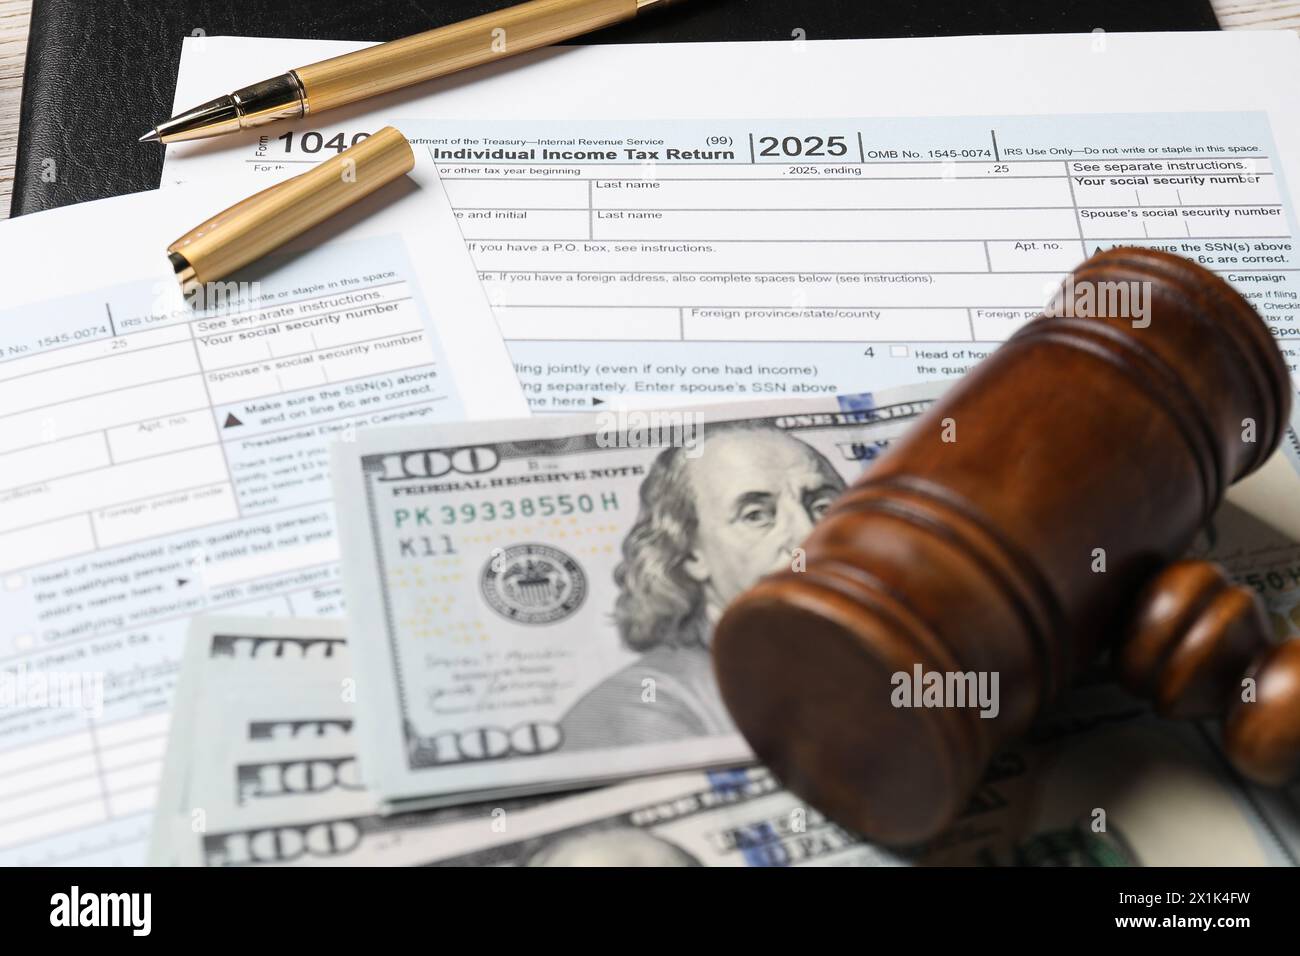 Tax return forms, dollar banknotes, gavel and pen on table, closeup Stock Photo